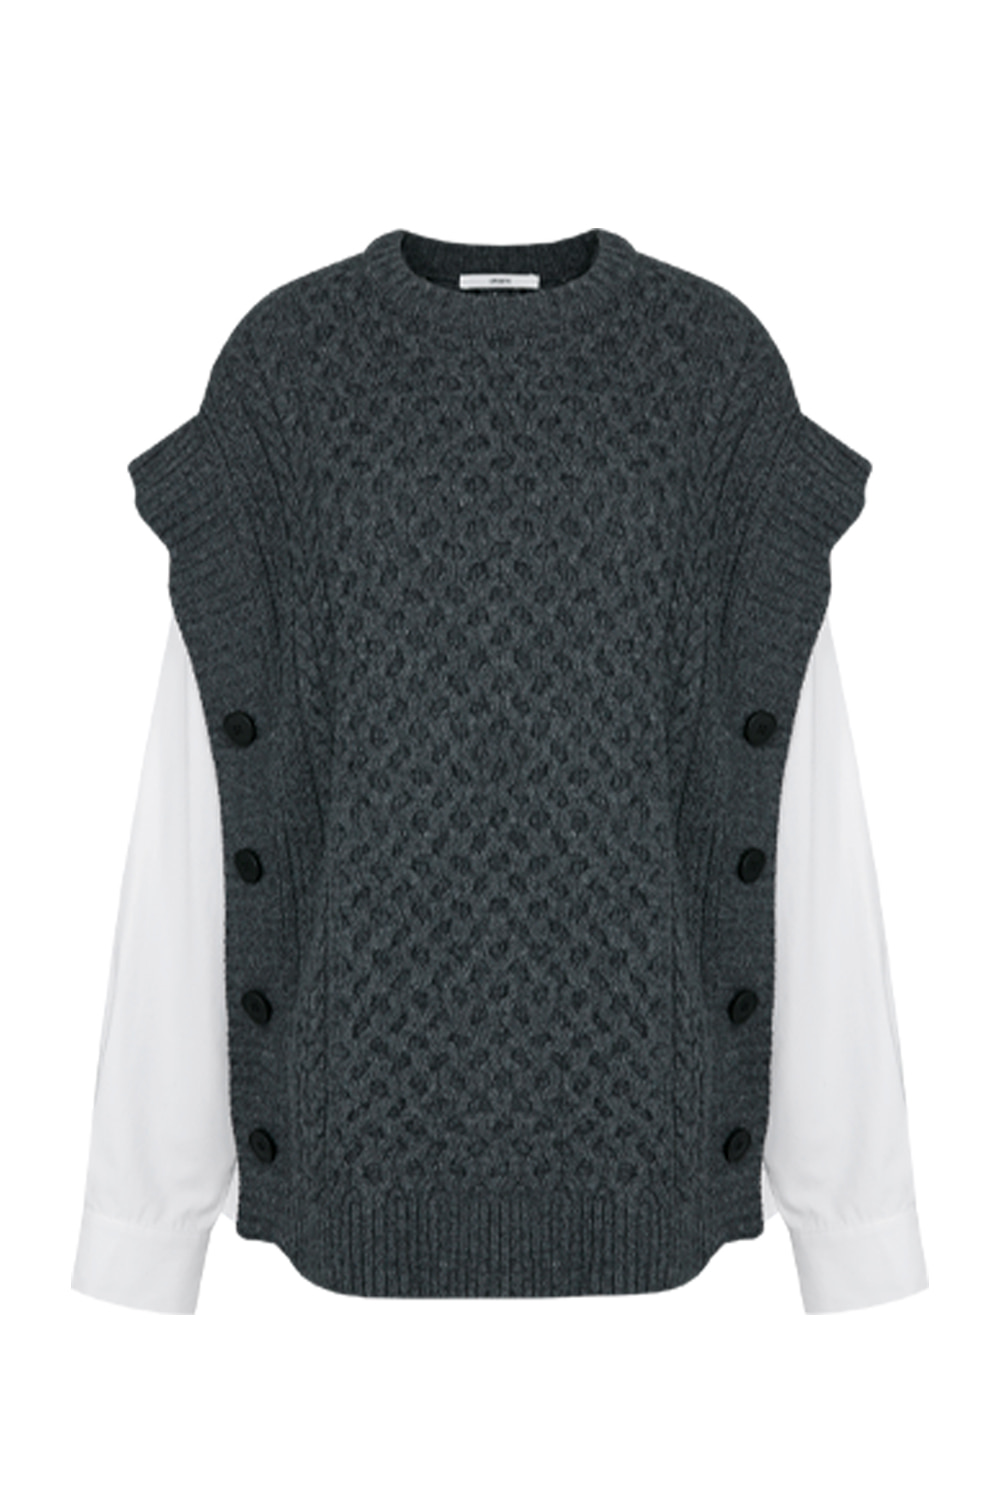 Knit coloration shirt_Charcoal